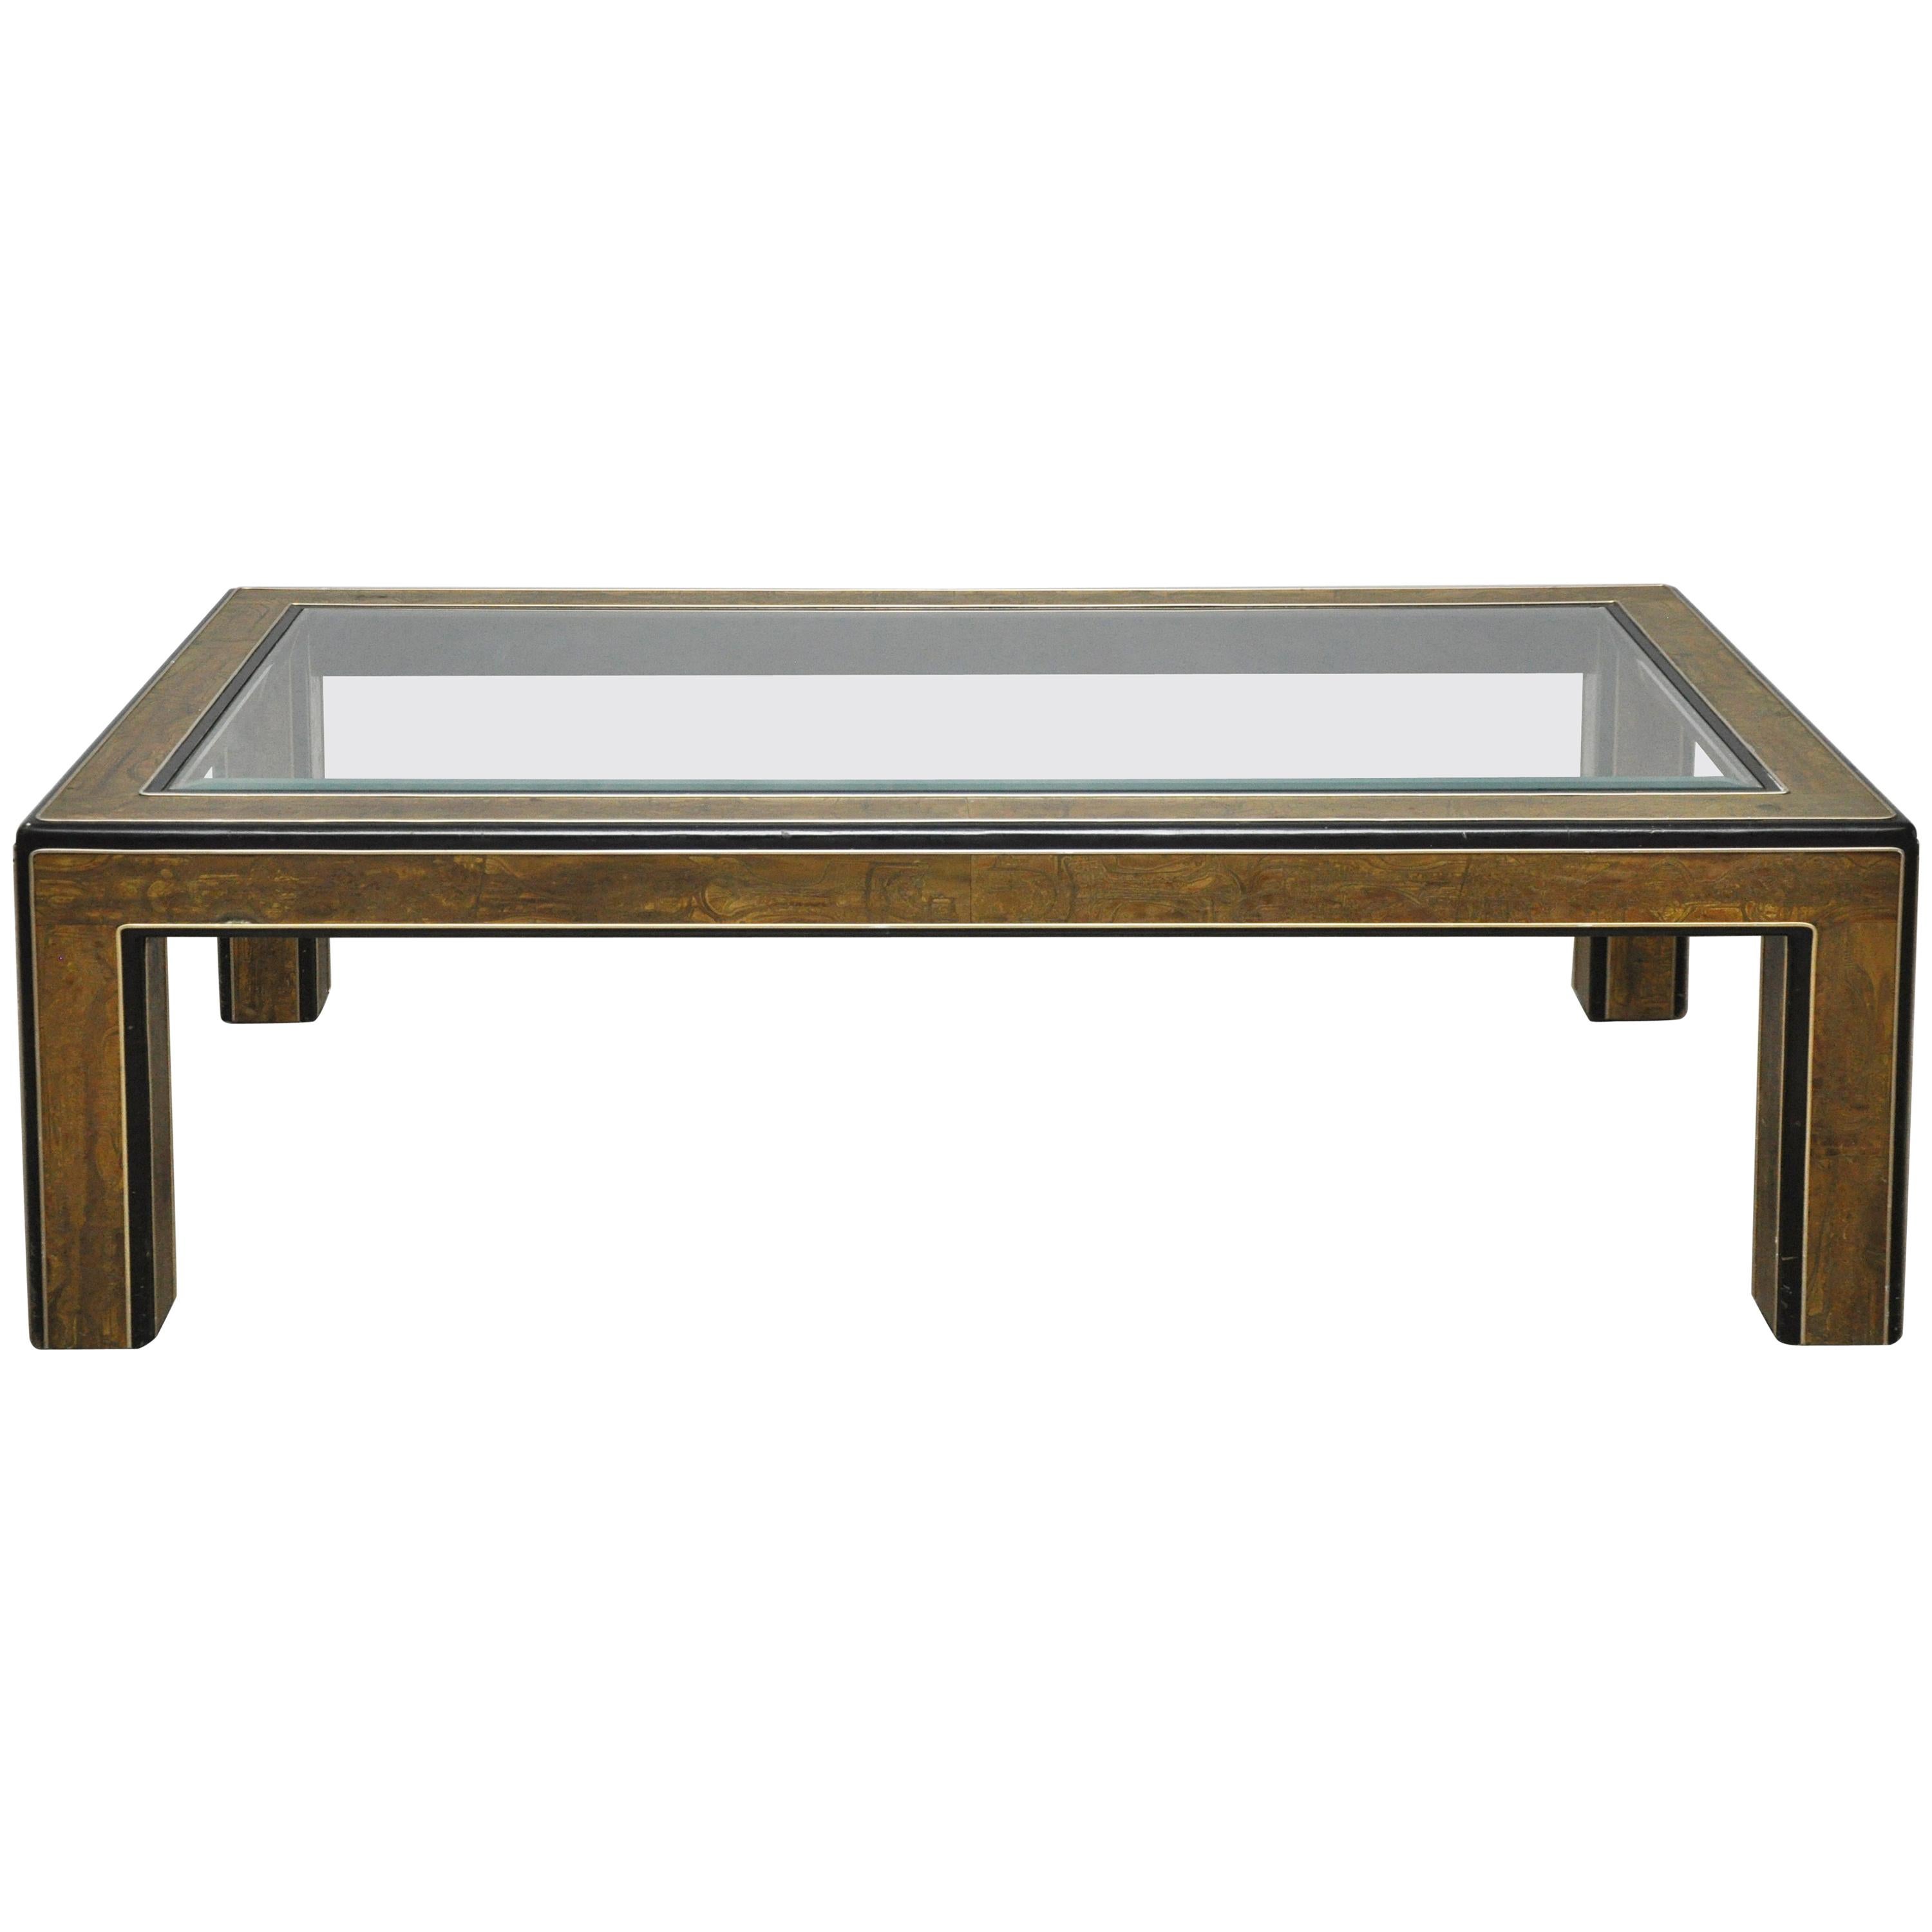 Mastercraft Acid Etched Coffee Table by Bernhard Rohne